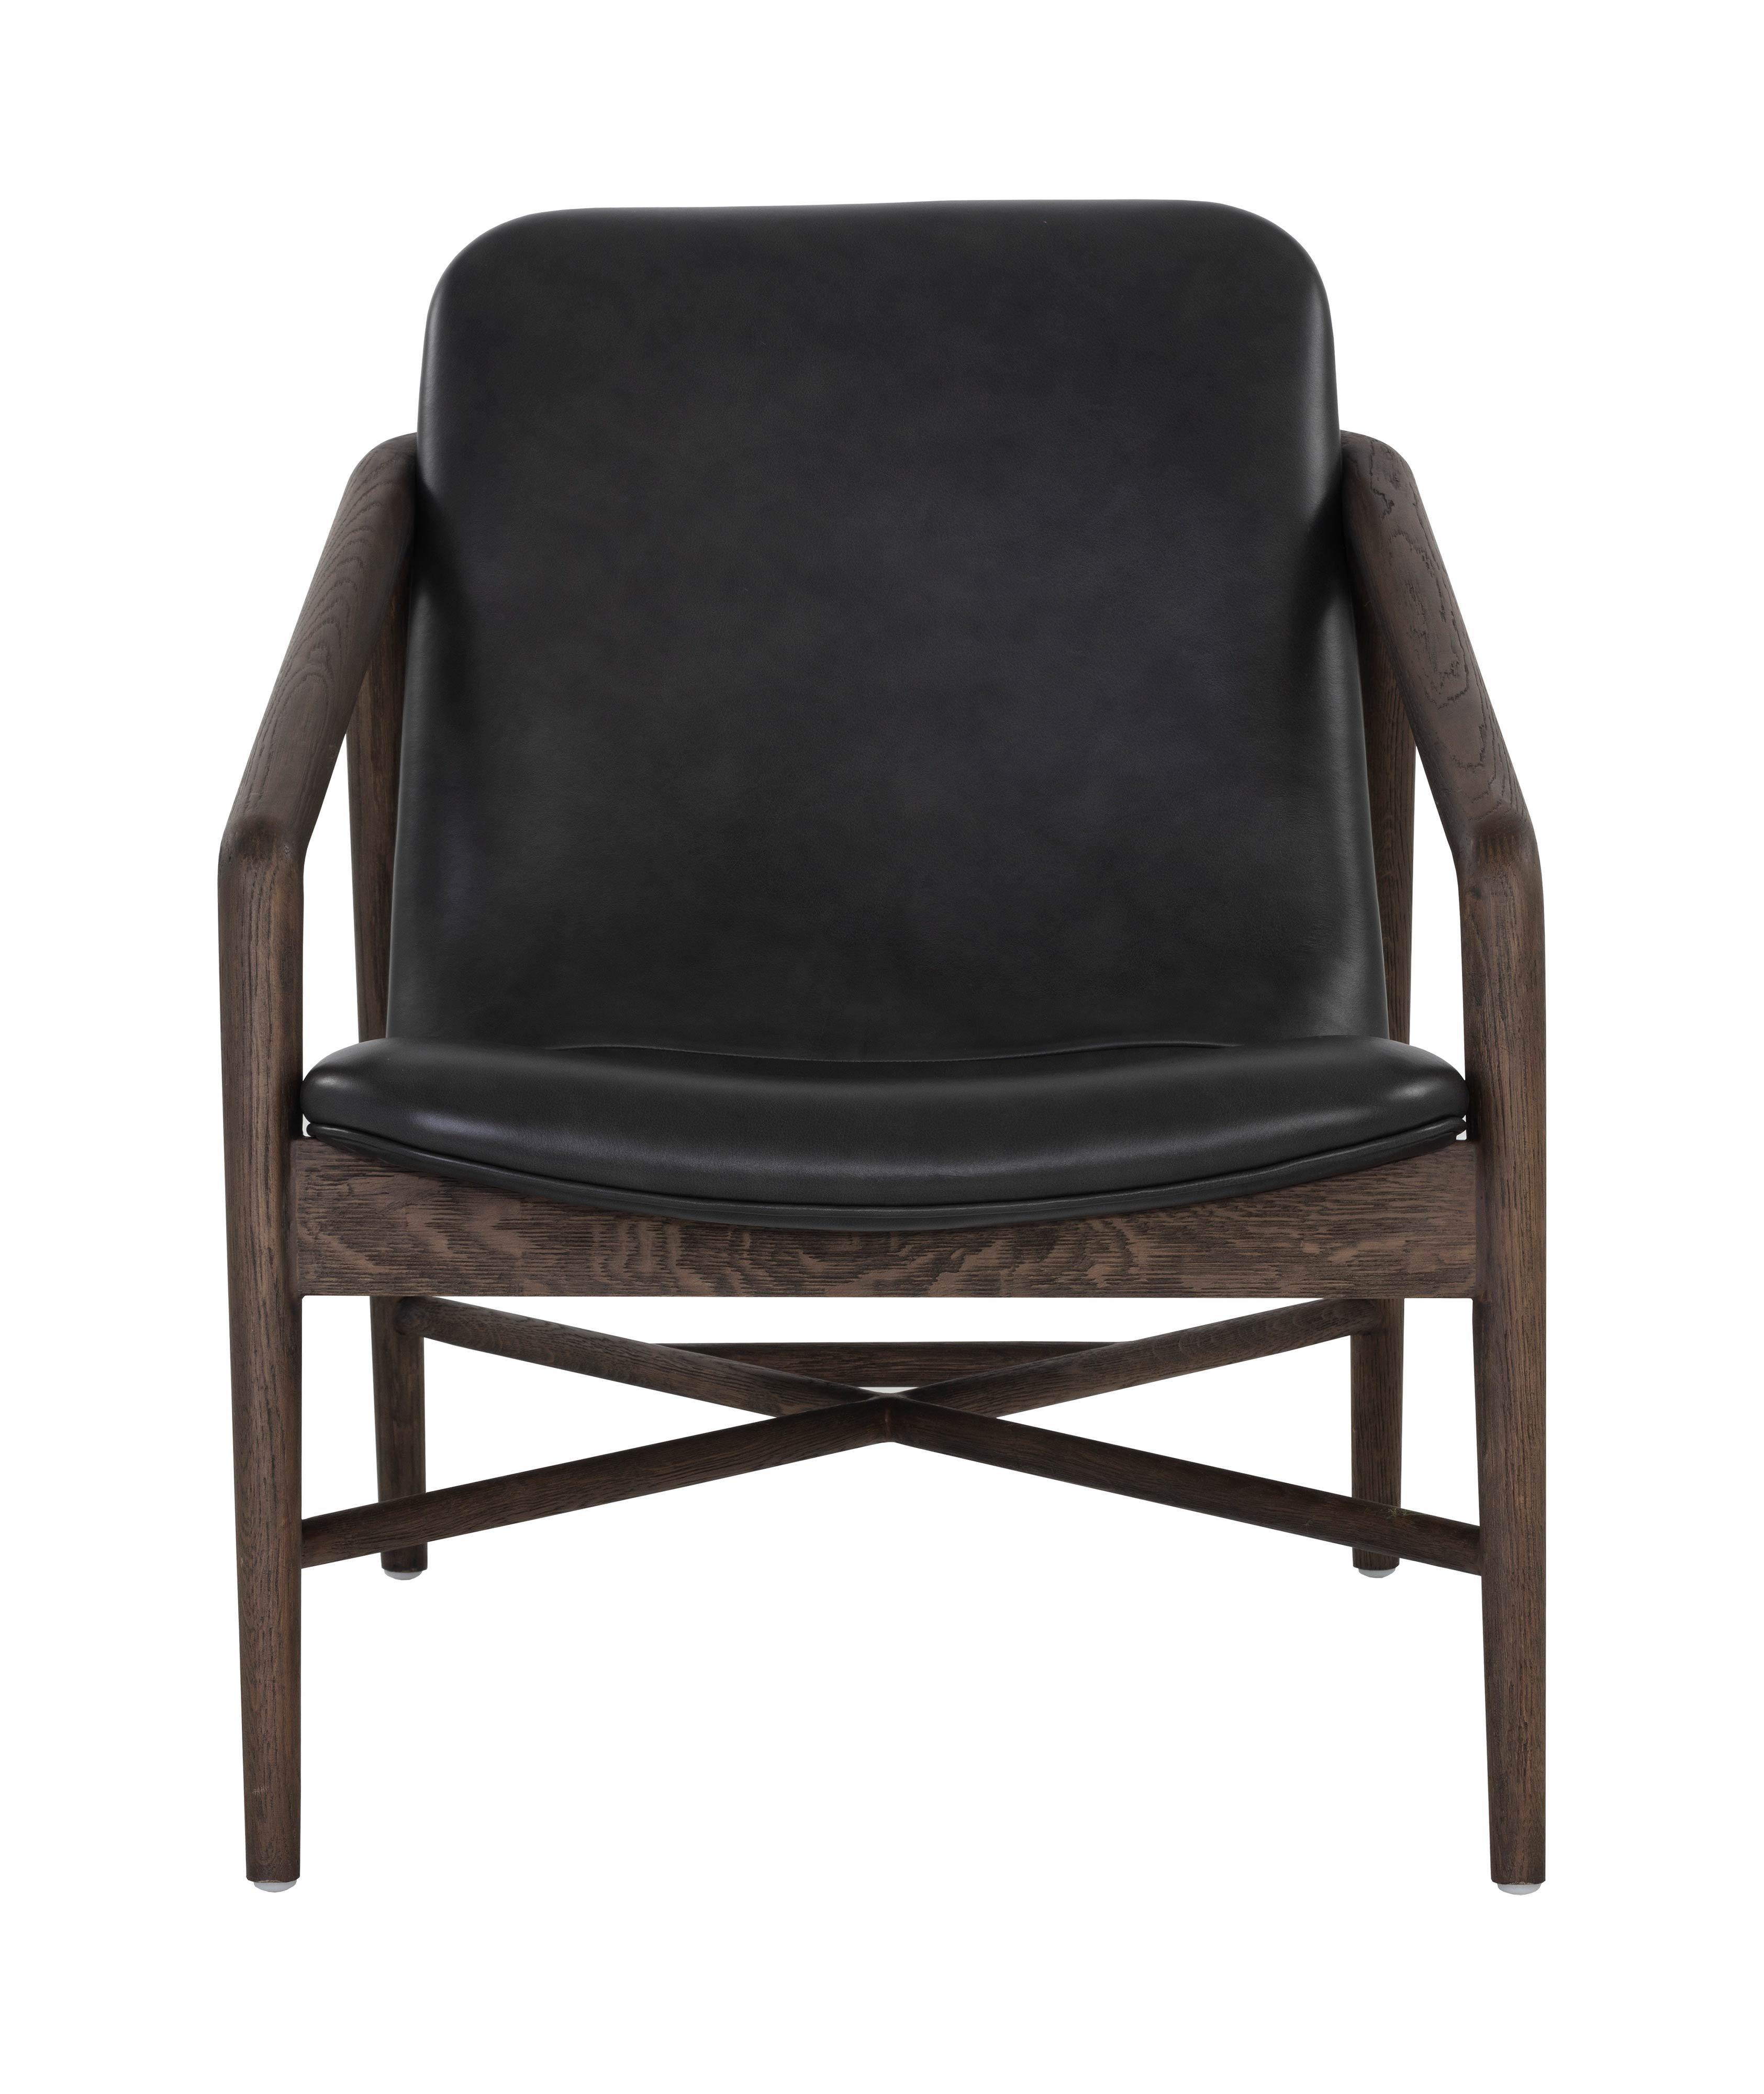 Cinelli Lounge Chair - Brentwood Charcoal Leather image 0